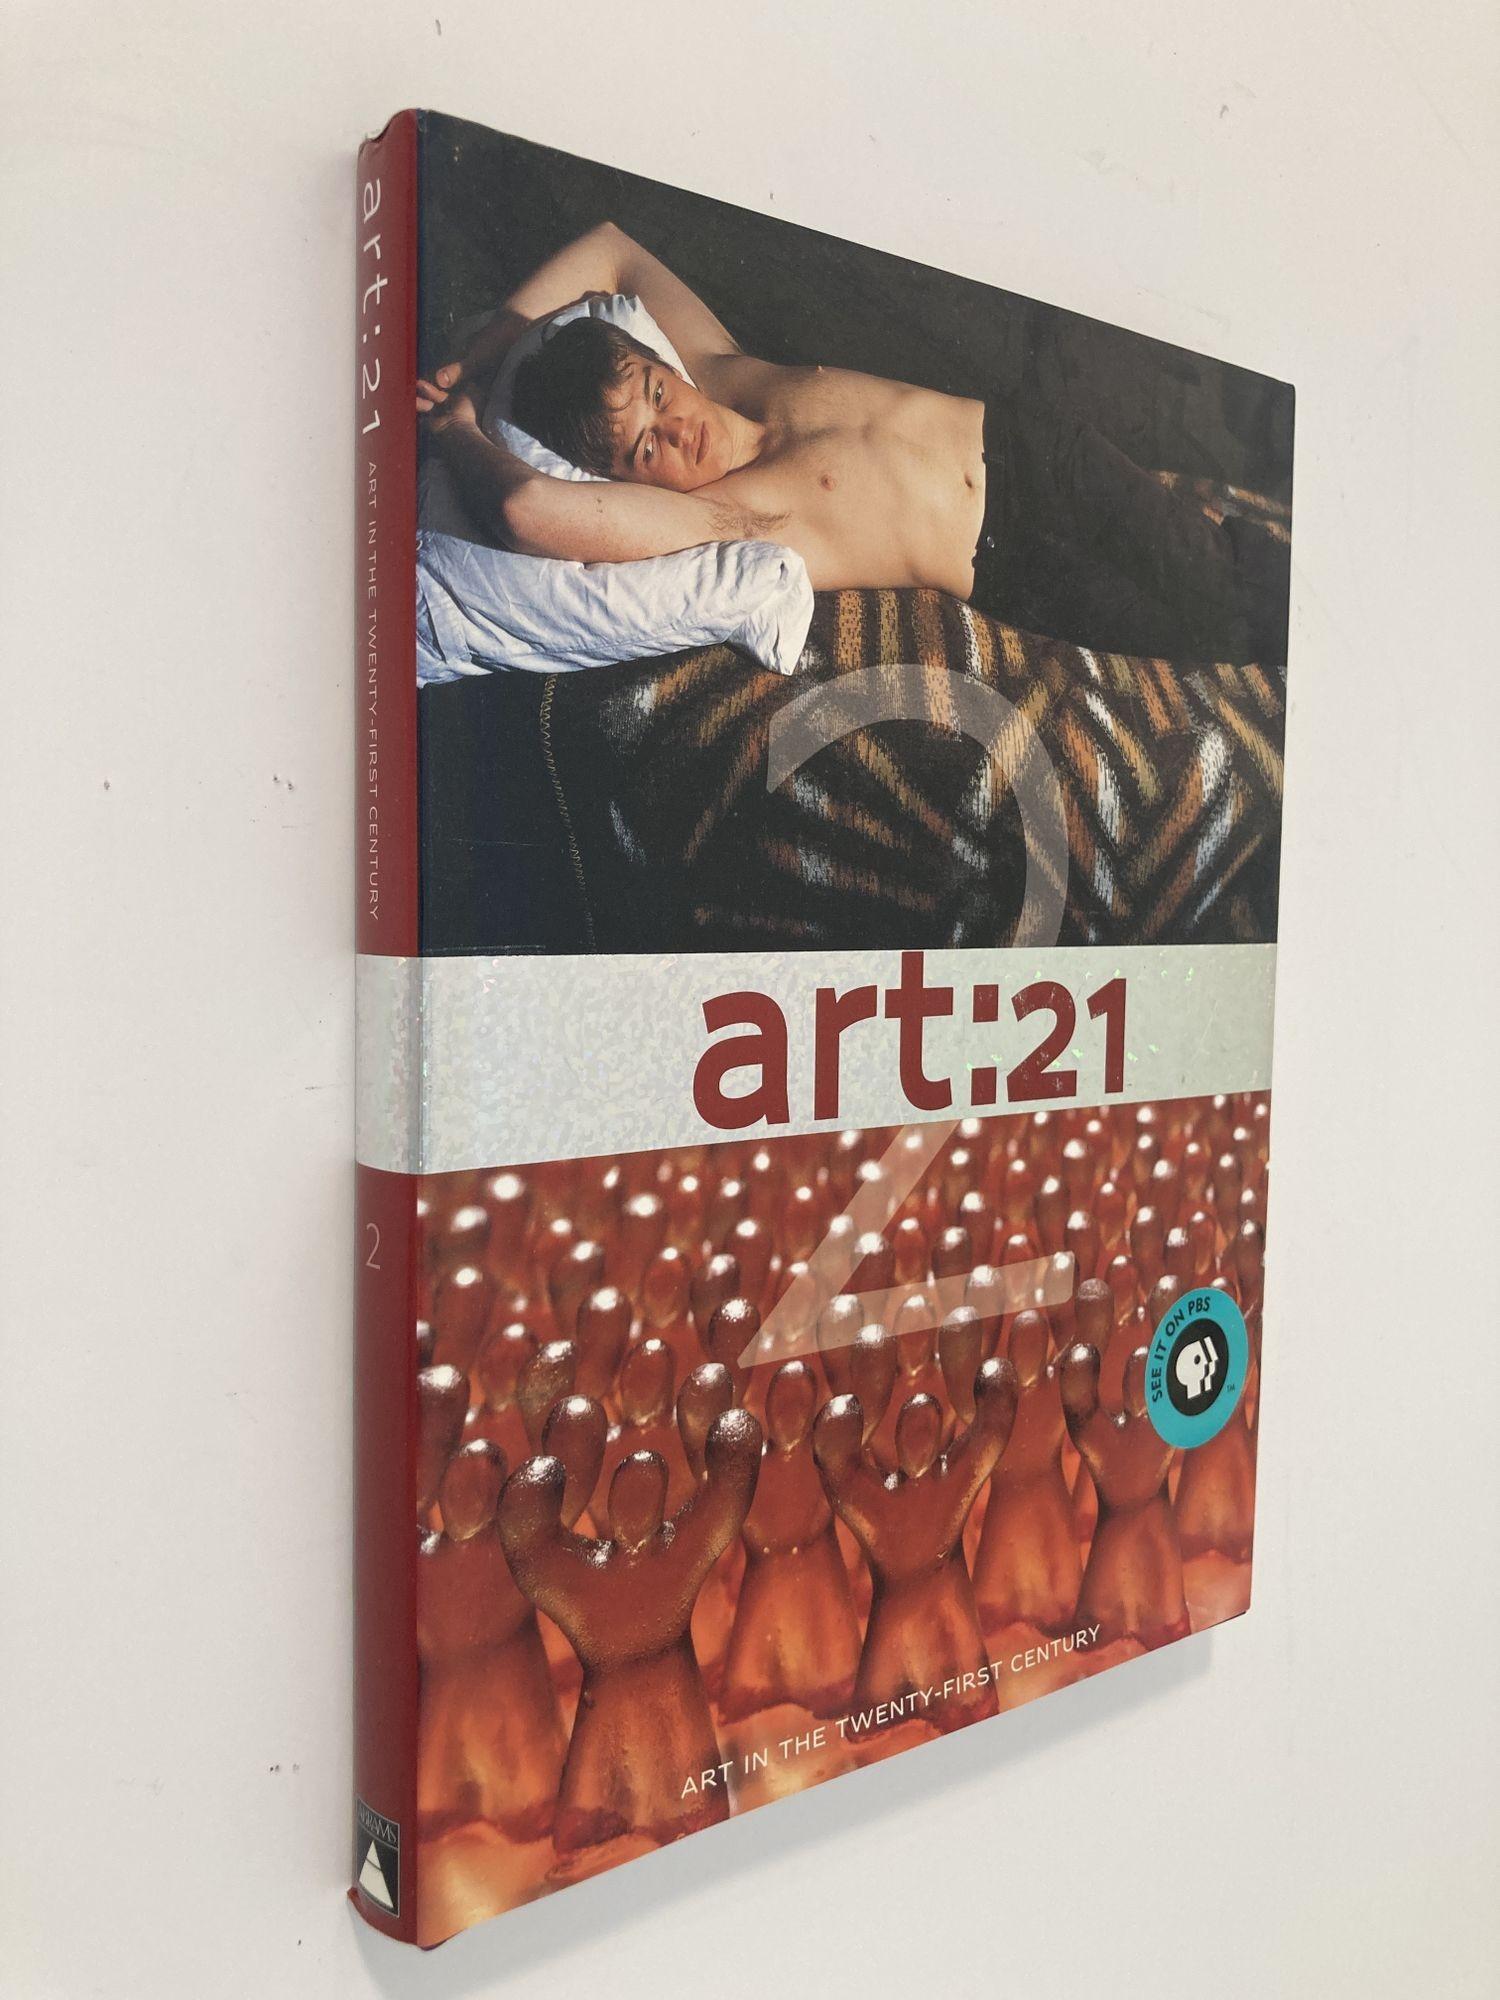 ART:21 Art in the 21st Century 2.
Limited edition 2003.
Published to accompany the second season of the PBS television series, this illustrated book offers a glimpse into the life stories, sources of inspiration and creative processes of some of